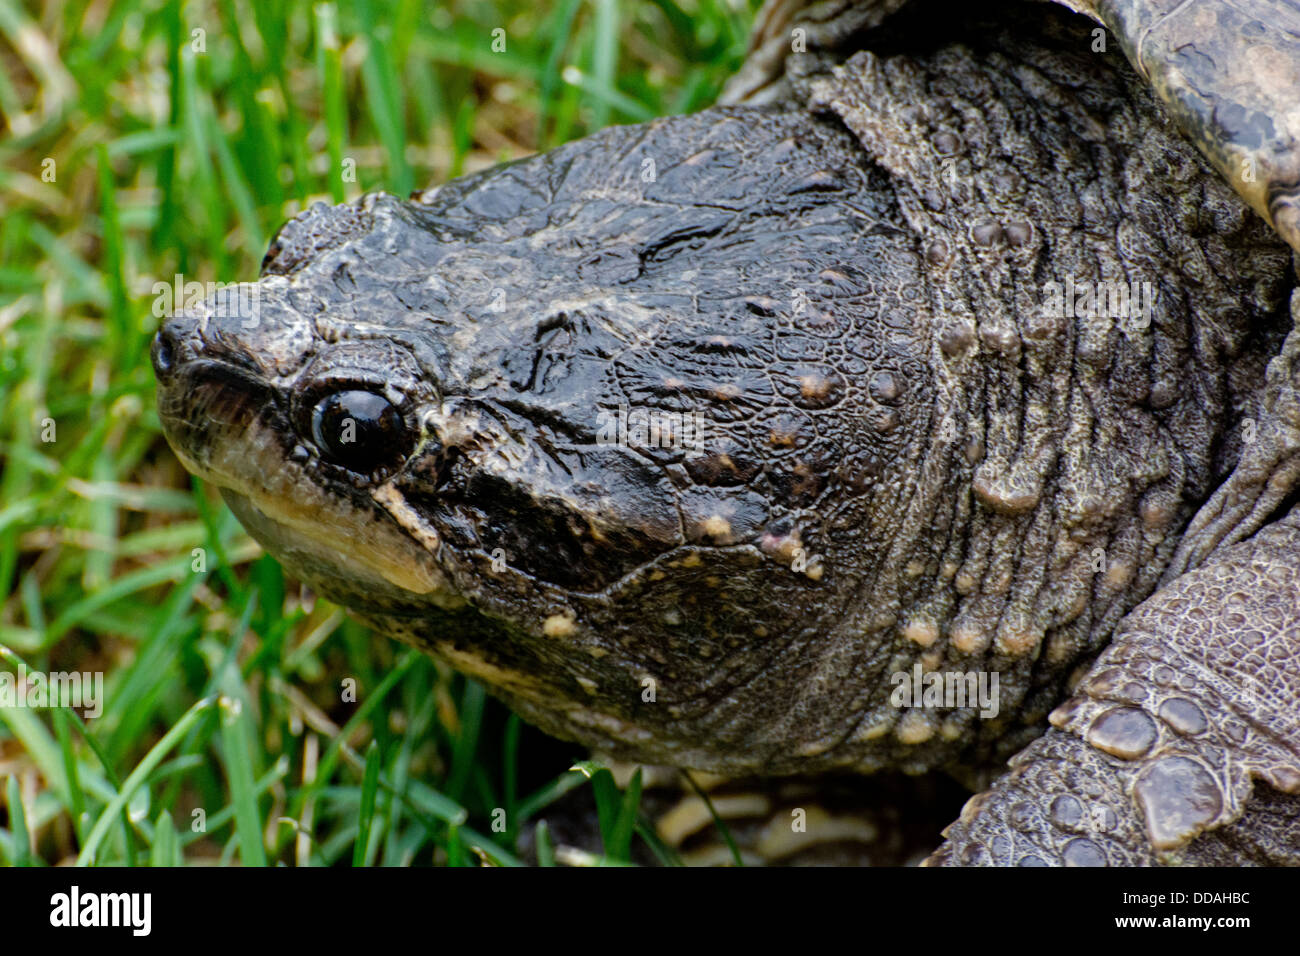 Close-up of the head of a Common Snapping Turtle. Stock Photo